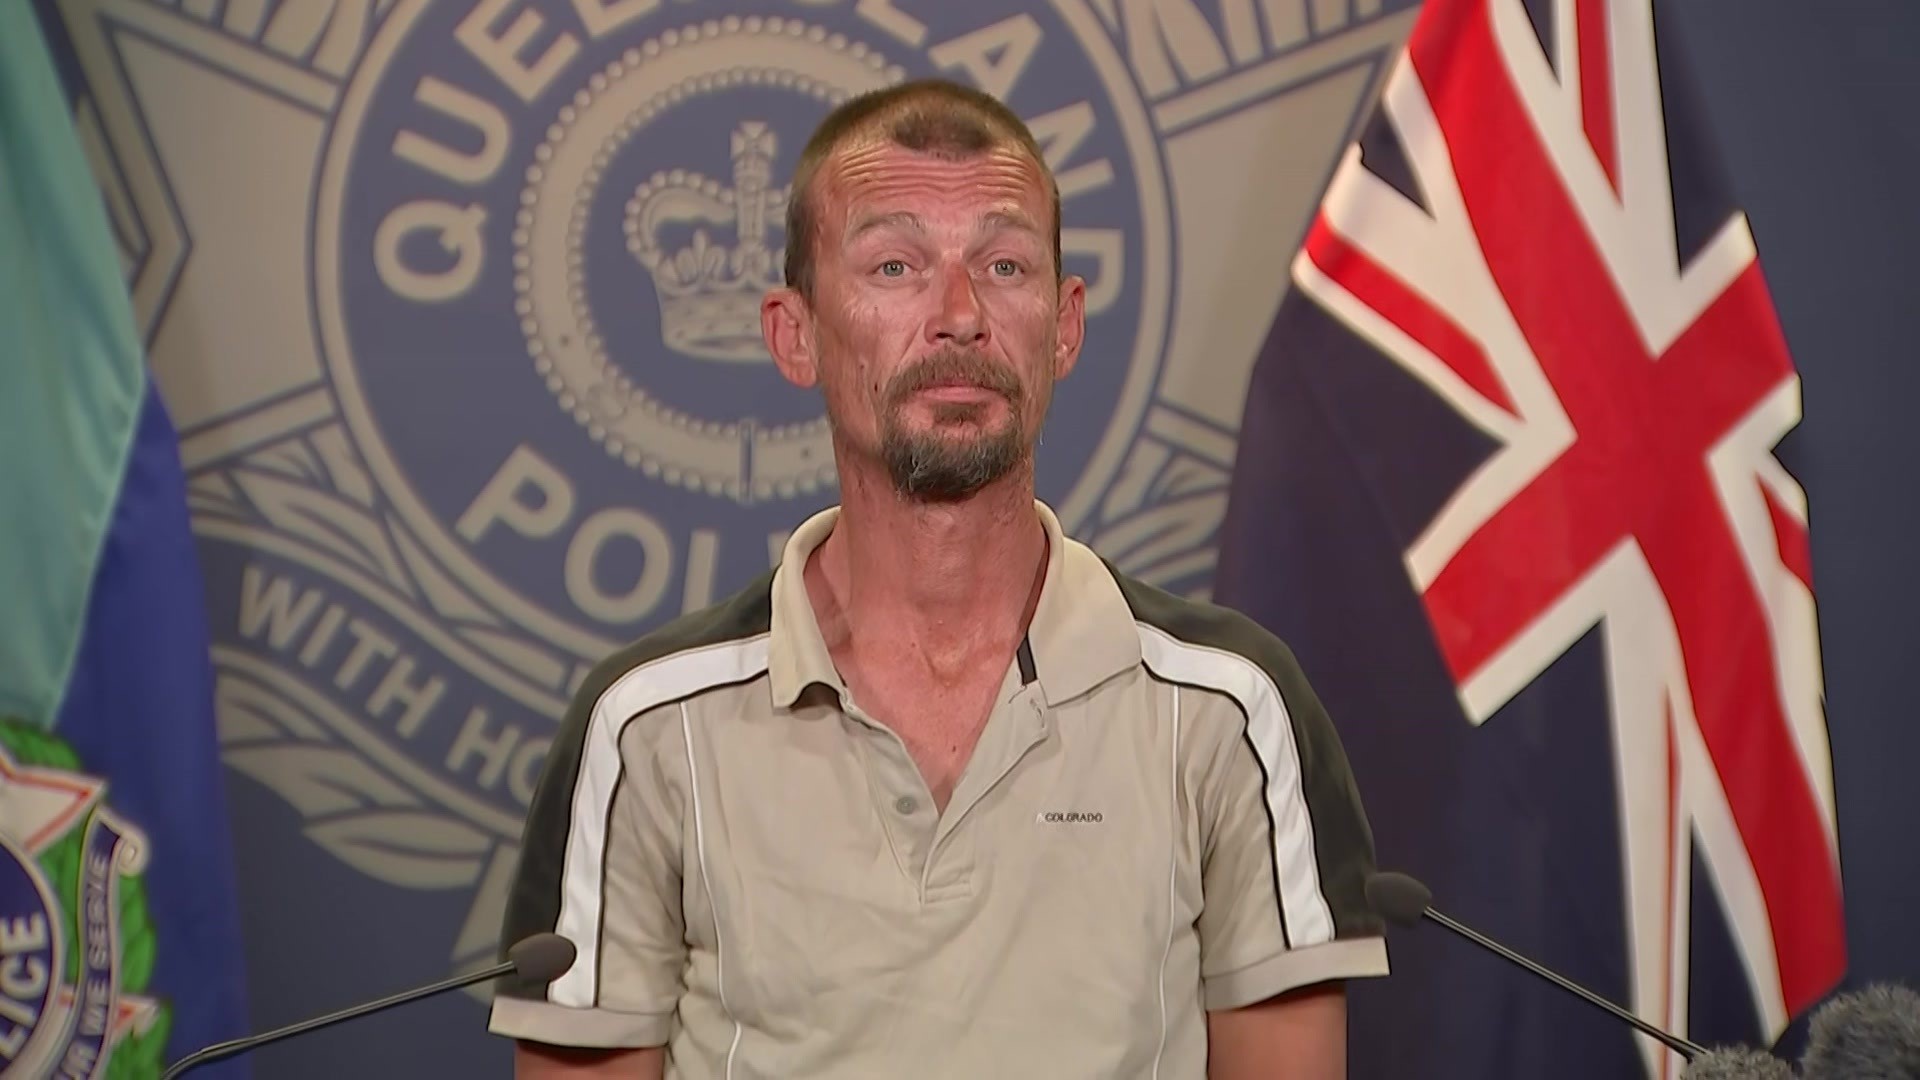 A man stands in front of a Qld police lecturn.